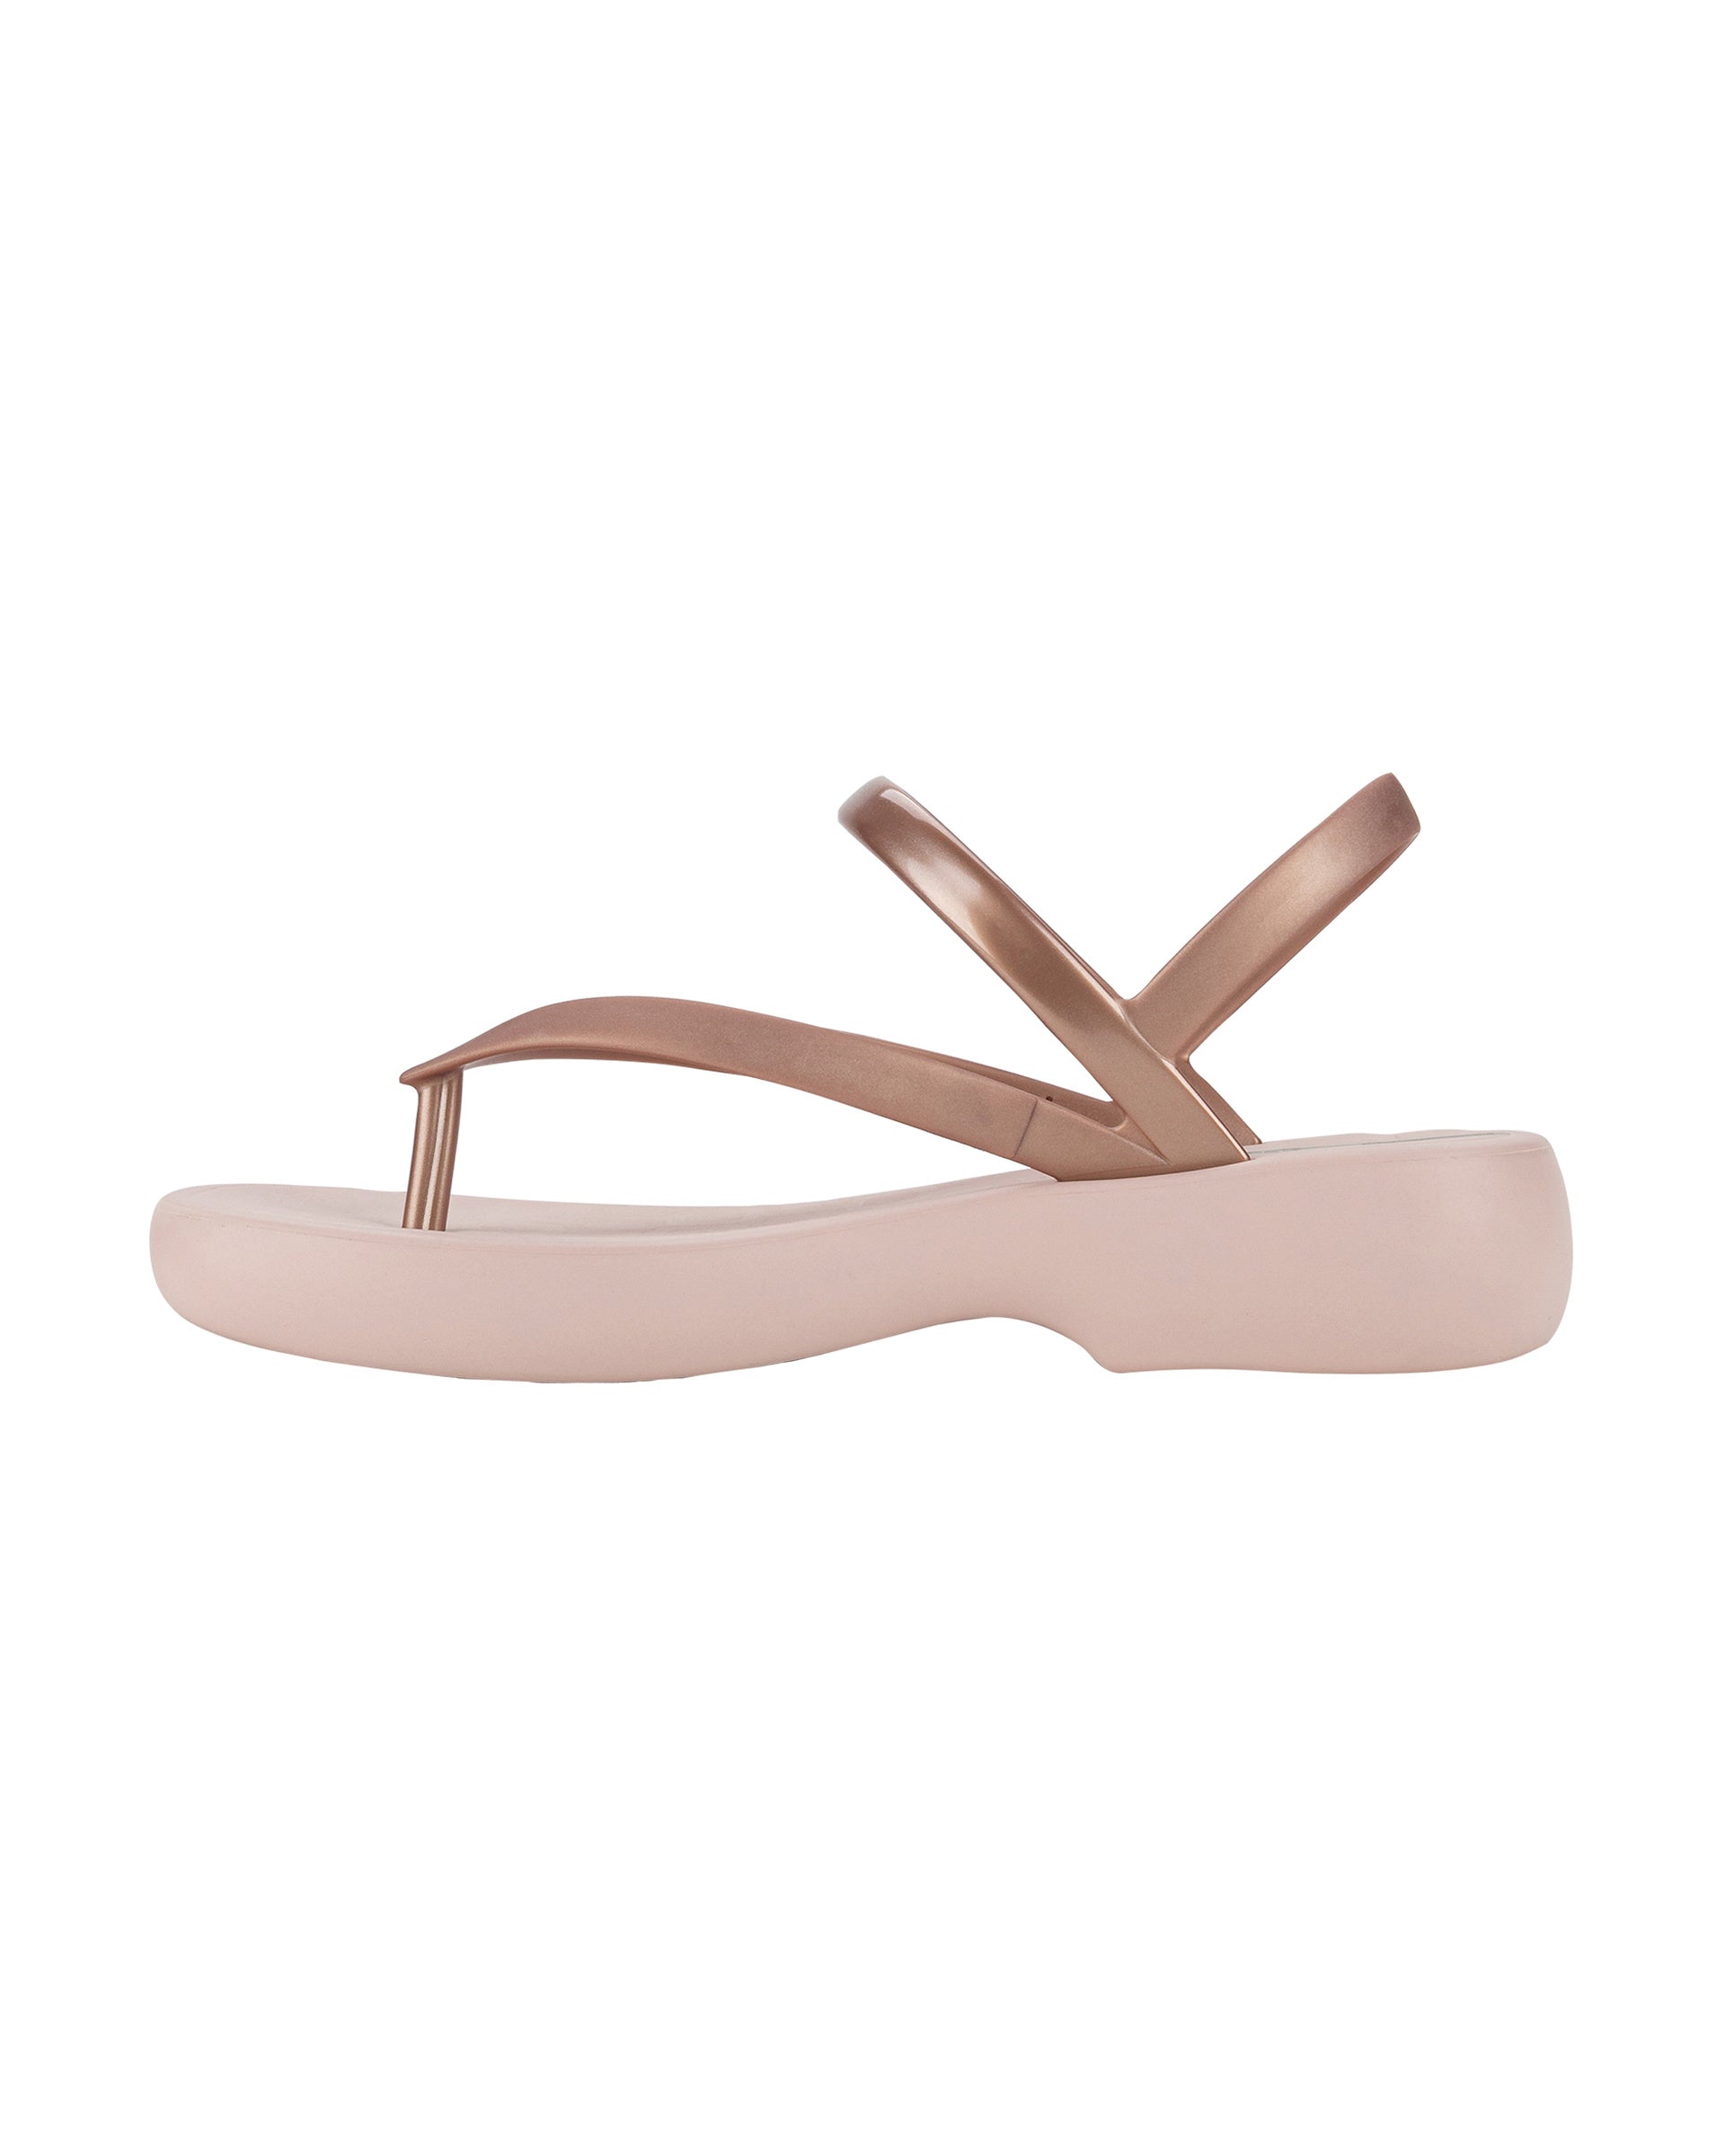 Inner side view of a pink Ipanema Verano women's sandal.